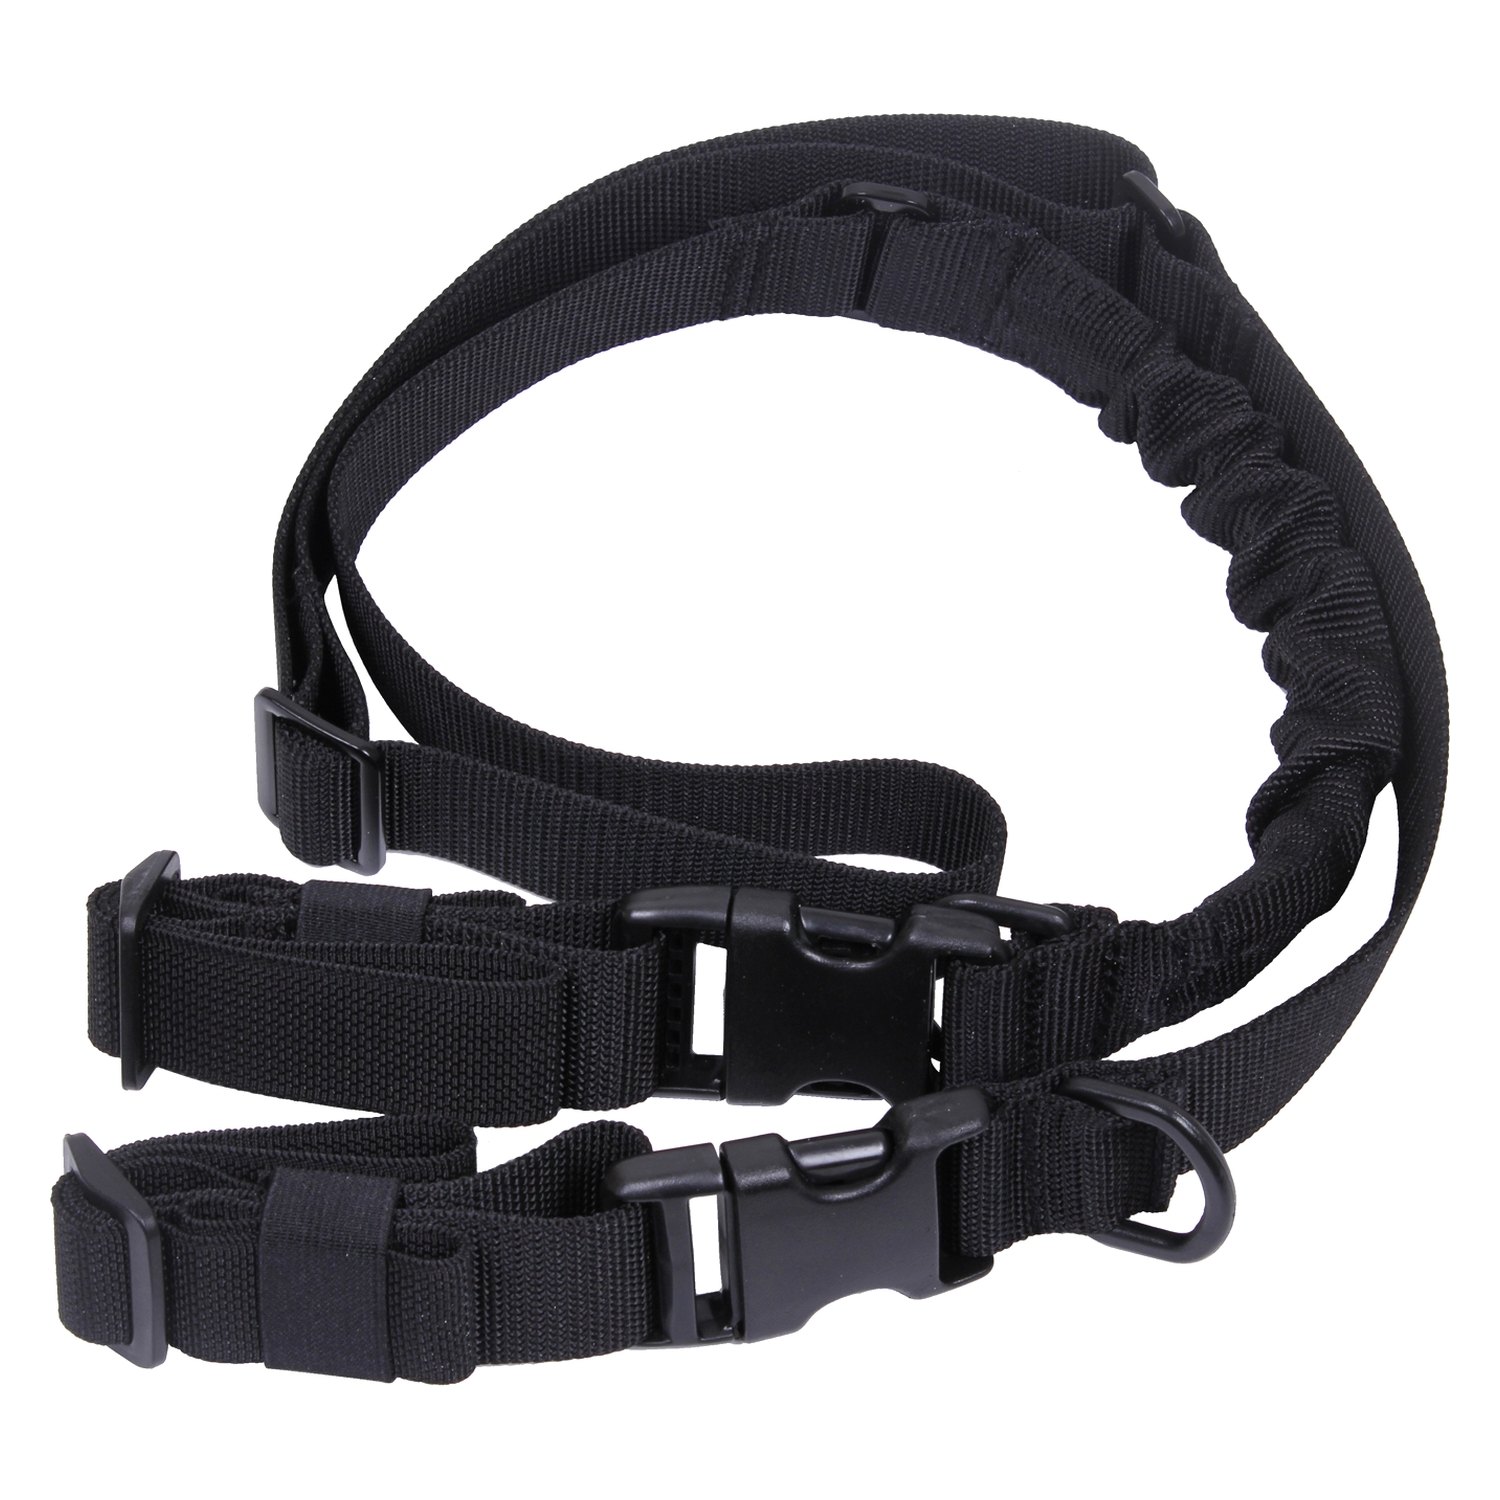 Rothco single point tactical sling